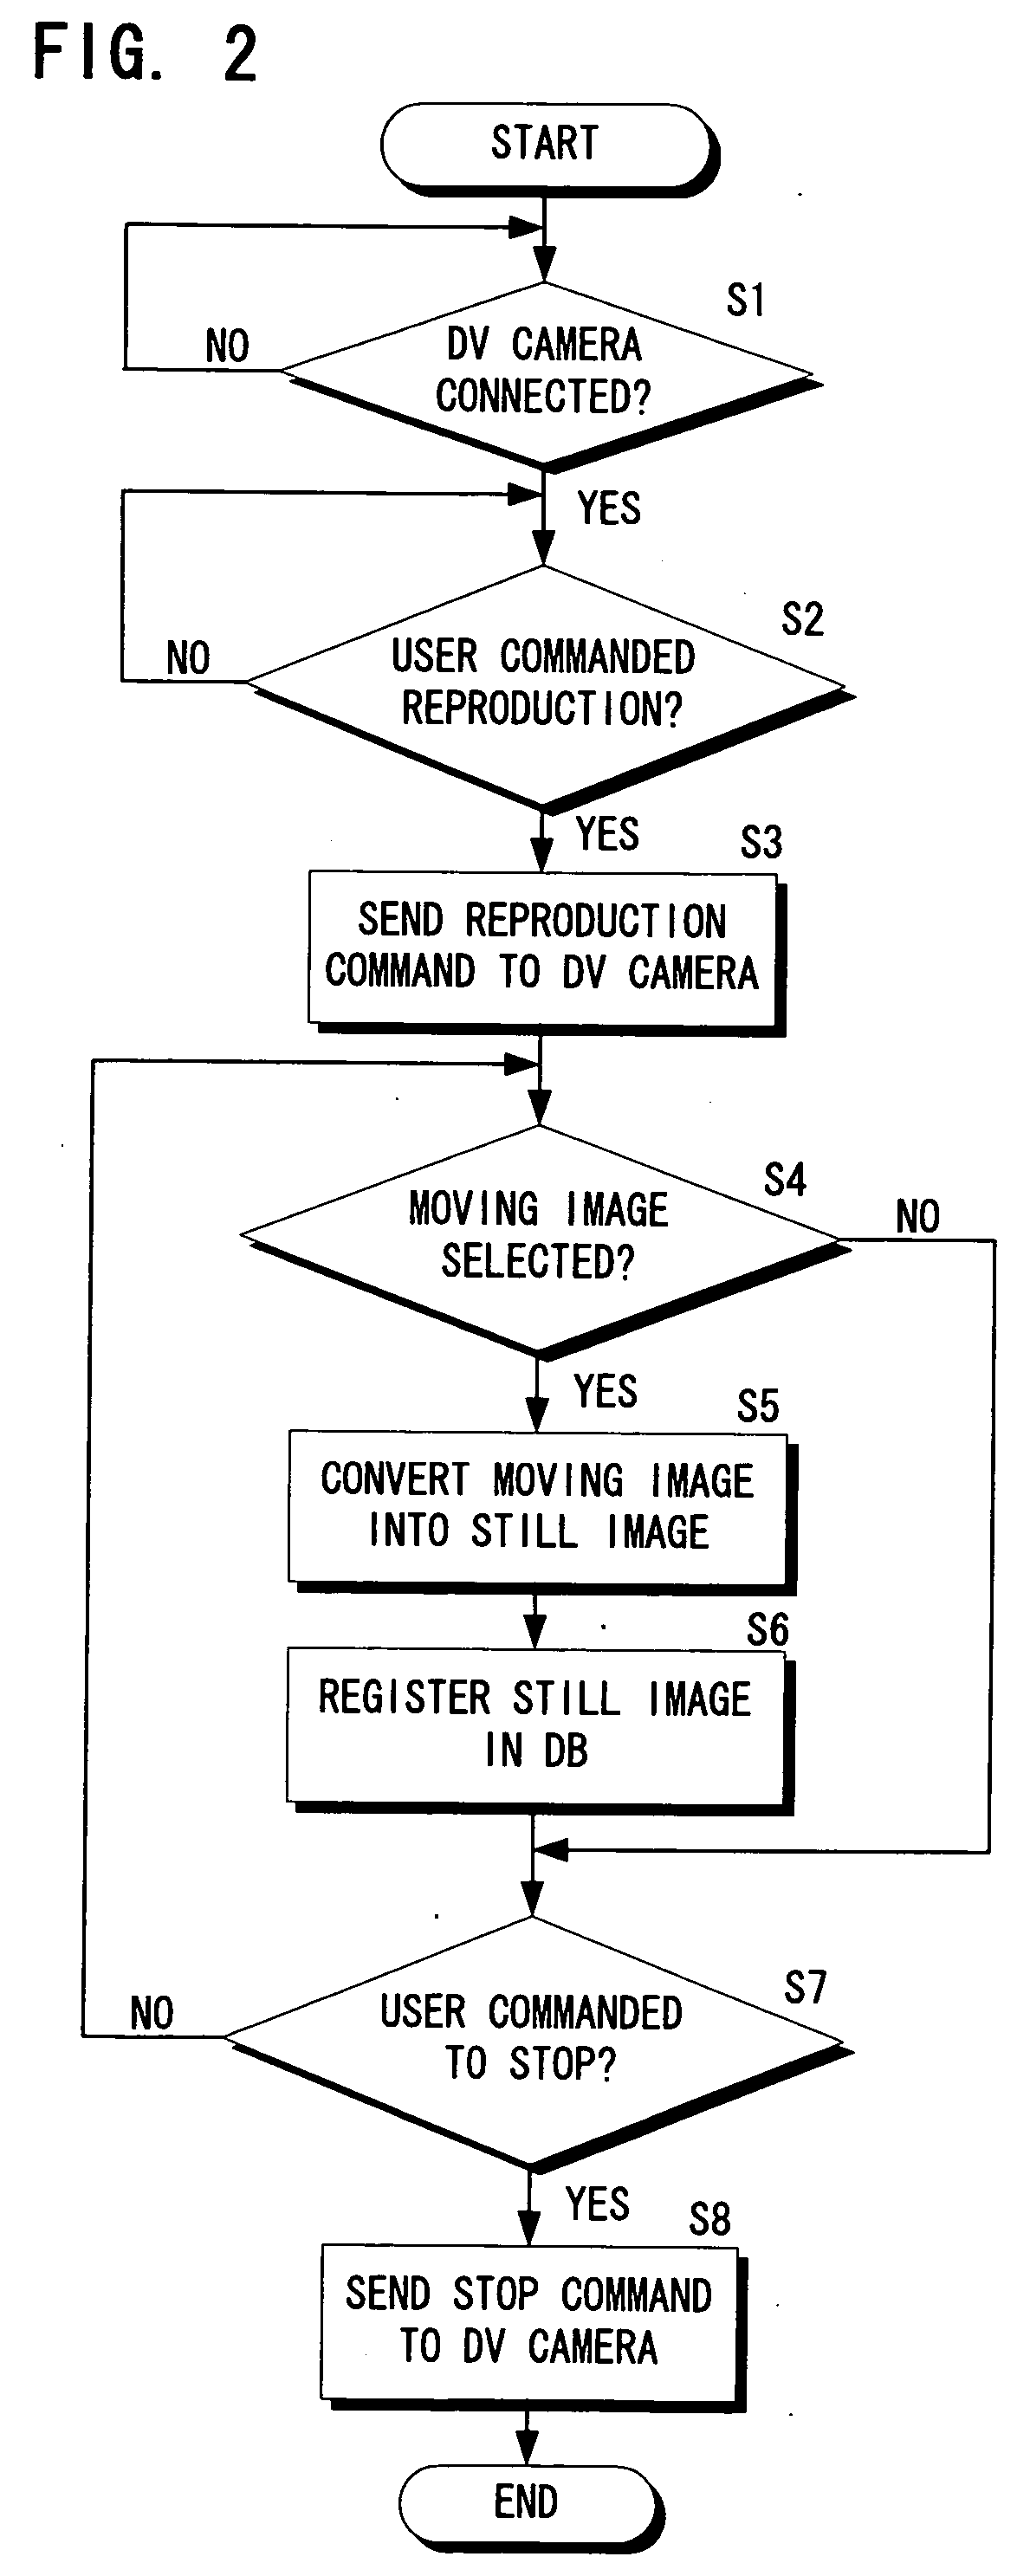 Digital video recording device to be connected to a digital video signal output device via an IEEE 1394 serial bus